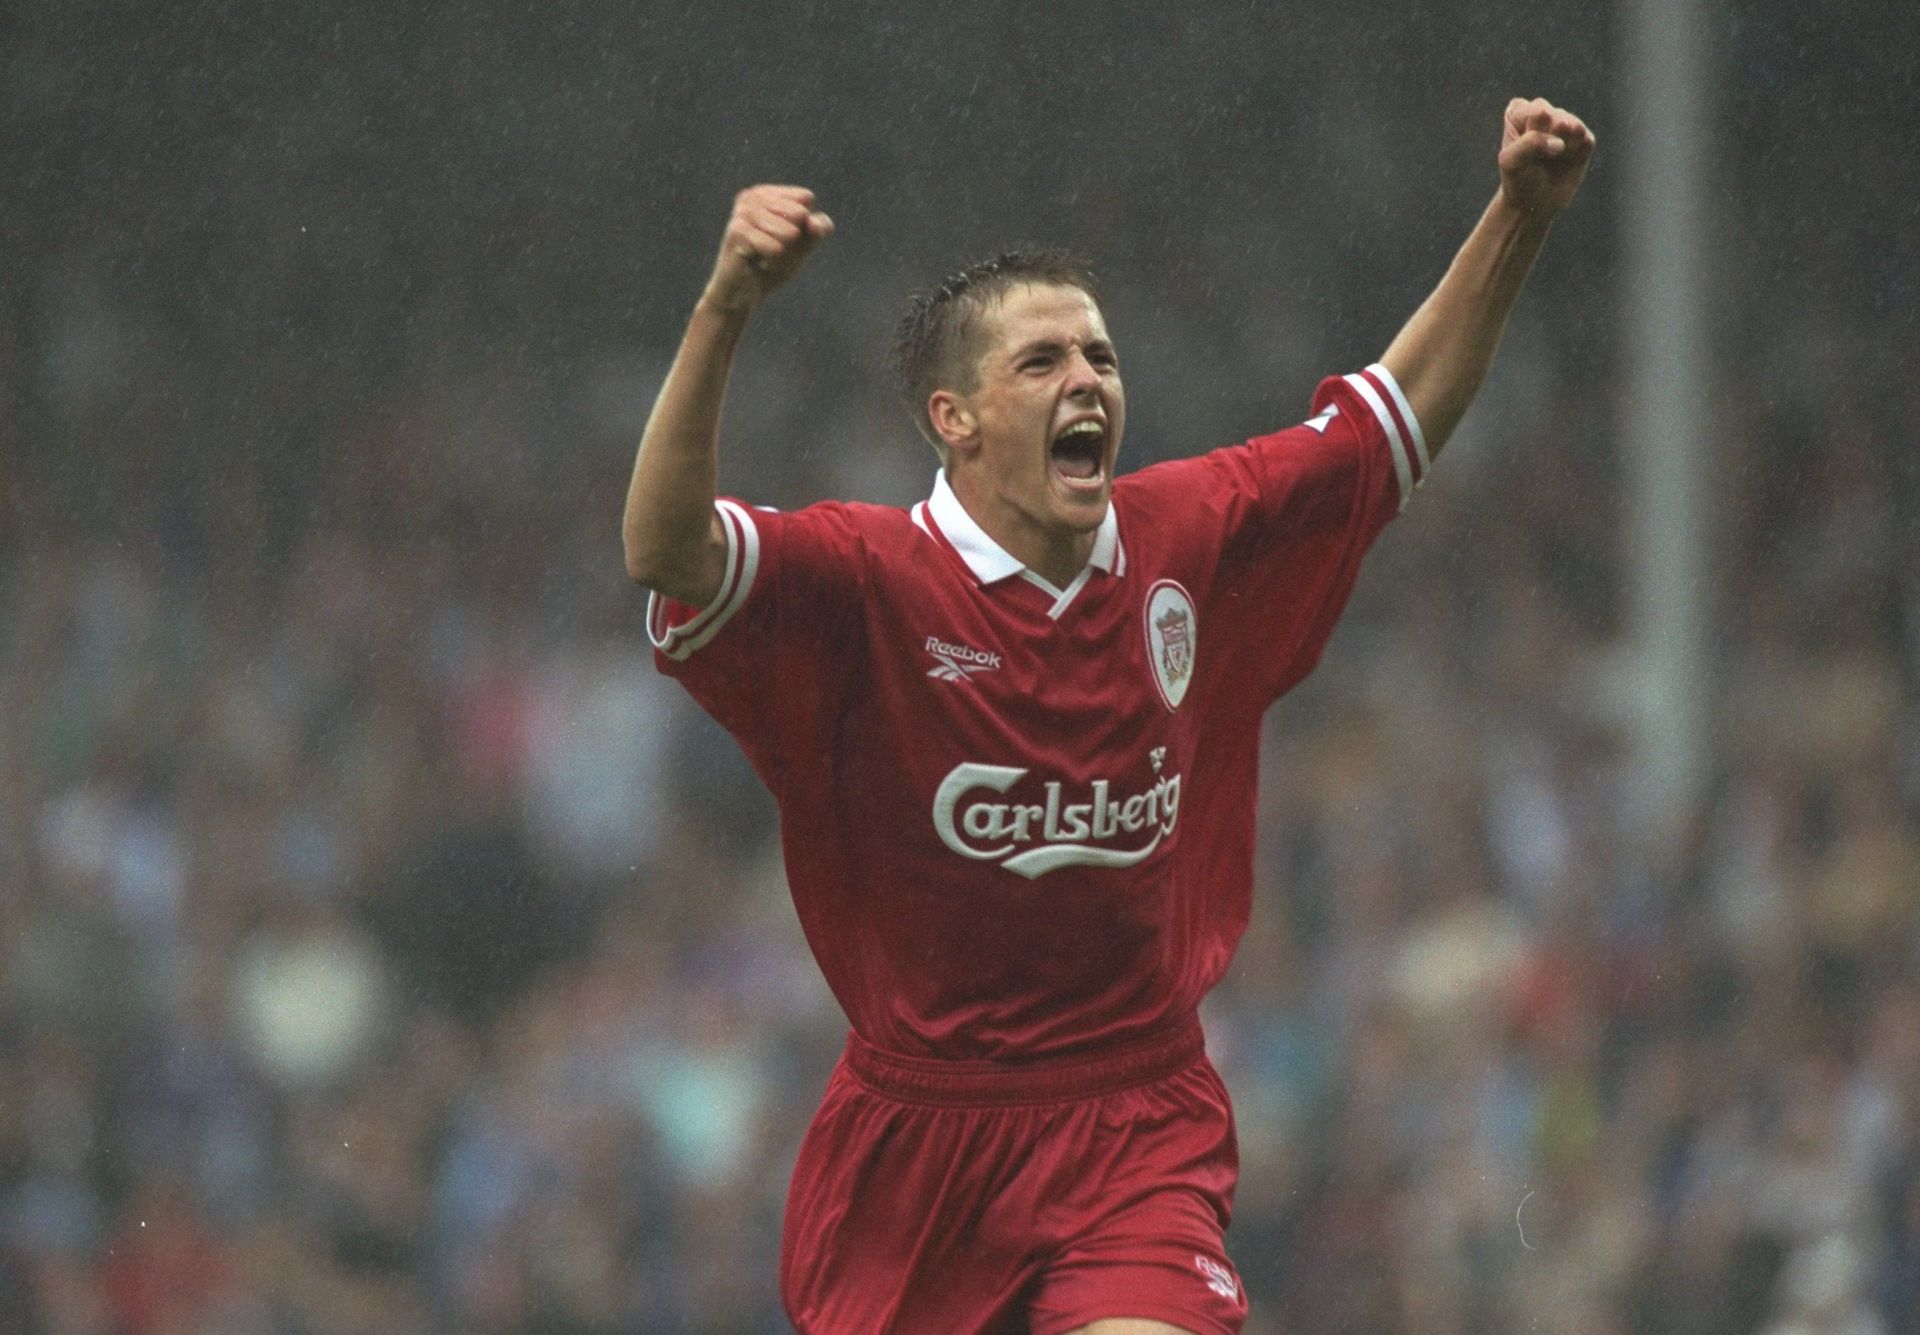 Michael Owen is one of the youngest scorers in Premier League history.